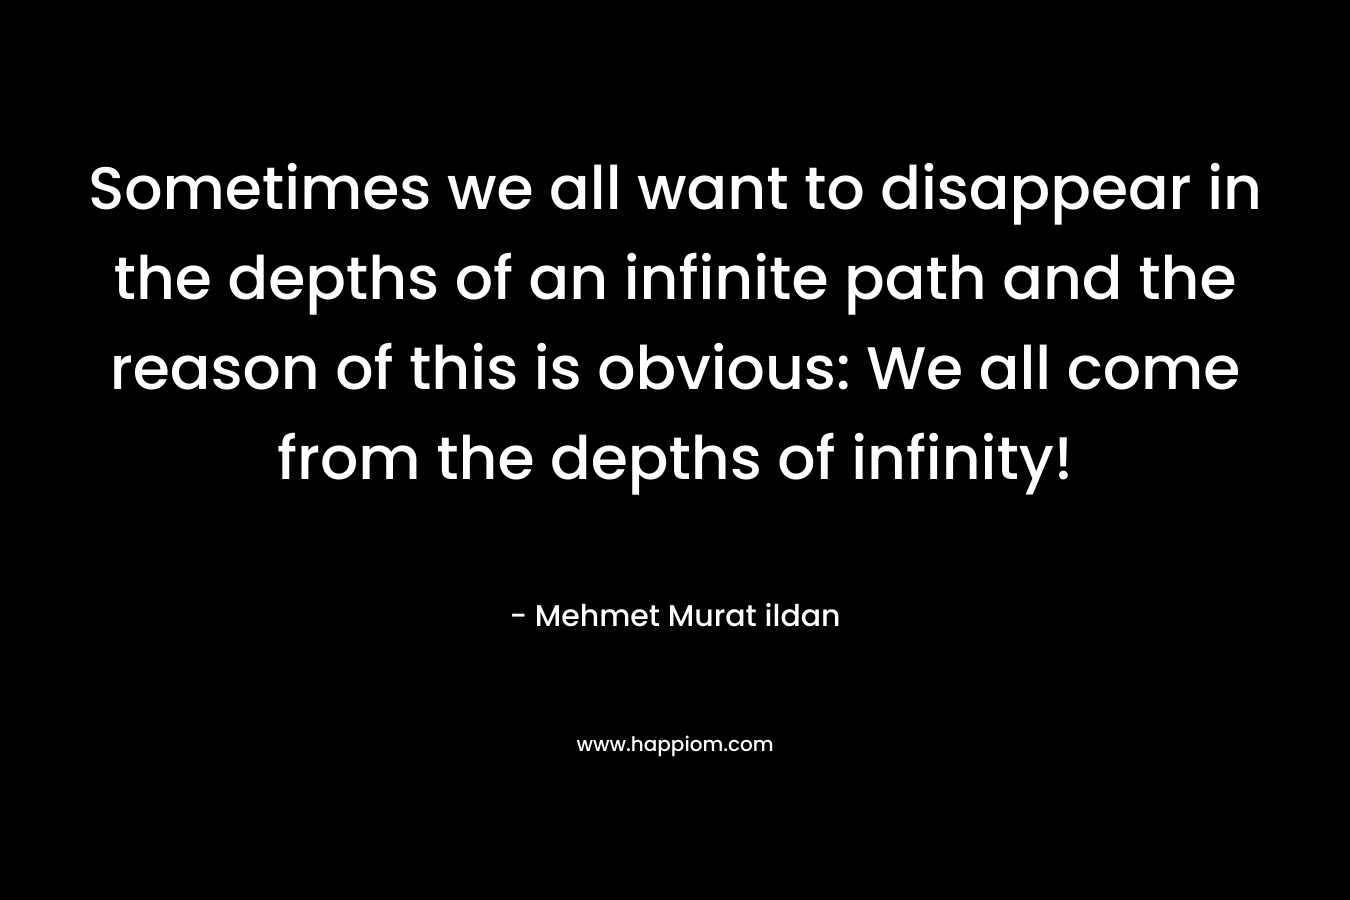 Sometimes we all want to disappear in the depths of an infinite path and the reason of this is obvious: We all come from the depths of infinity!